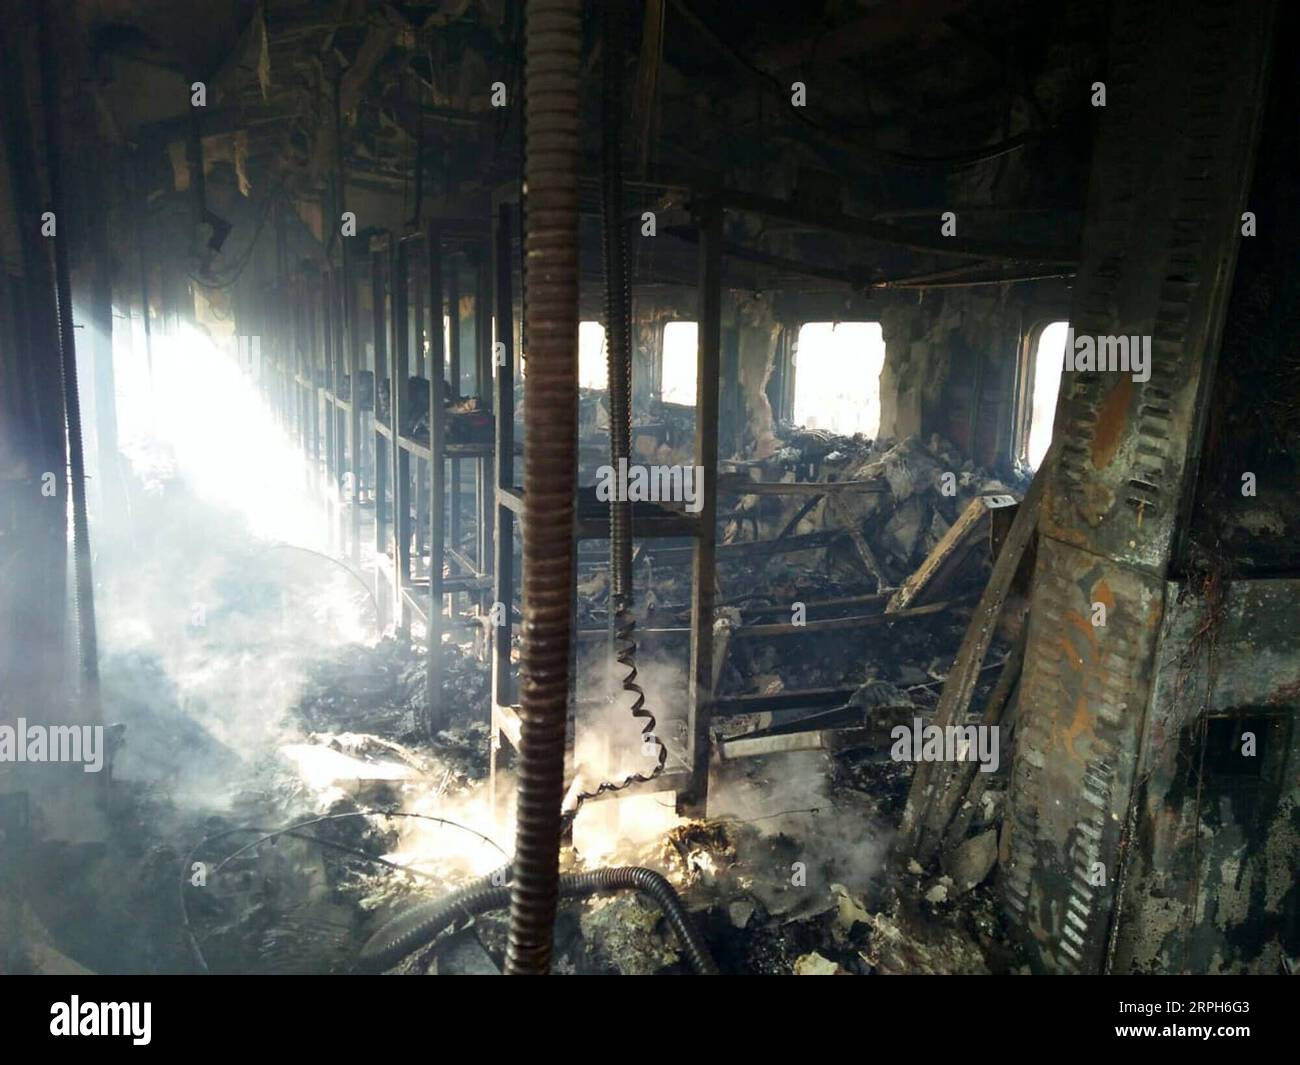 191031 -- RAHIM YAR KHAN, Oct. 31, 2019 -- Photo taken with mobile phone shows a burnt compartment of a passenger train in Rahim Yar Khan district of Pakistan s east Punjab province on Oct. 31, 2019. At least 65 people were killed and 14 others injured after a passenger train caught fire in Rahim Yar Khan district of Pakistan s east Punjab province on Thursday, a rescue official and local reports said. The death toll is feared to rise as rescue work continues to recover more bodies from the compartments gutted in the fire, Baqir Hussain, district emergency officer of state-owned Rescue 1122, t Stock Photo